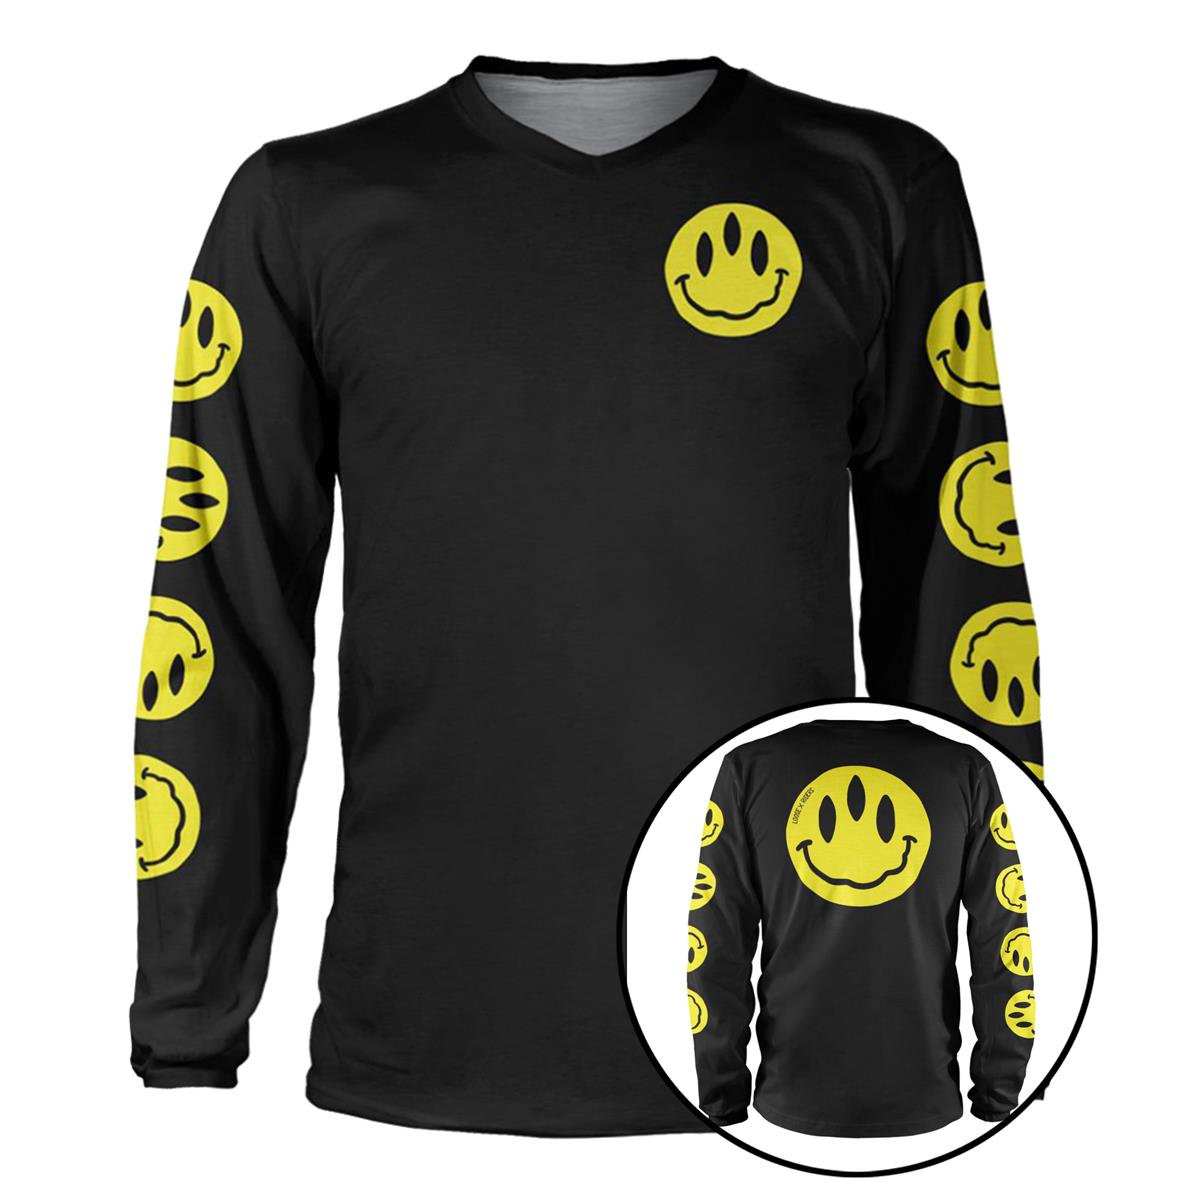 Loose Riders Downhill Jersey Long Sleeve Cult of Shred Stoked! - Black/Yellow